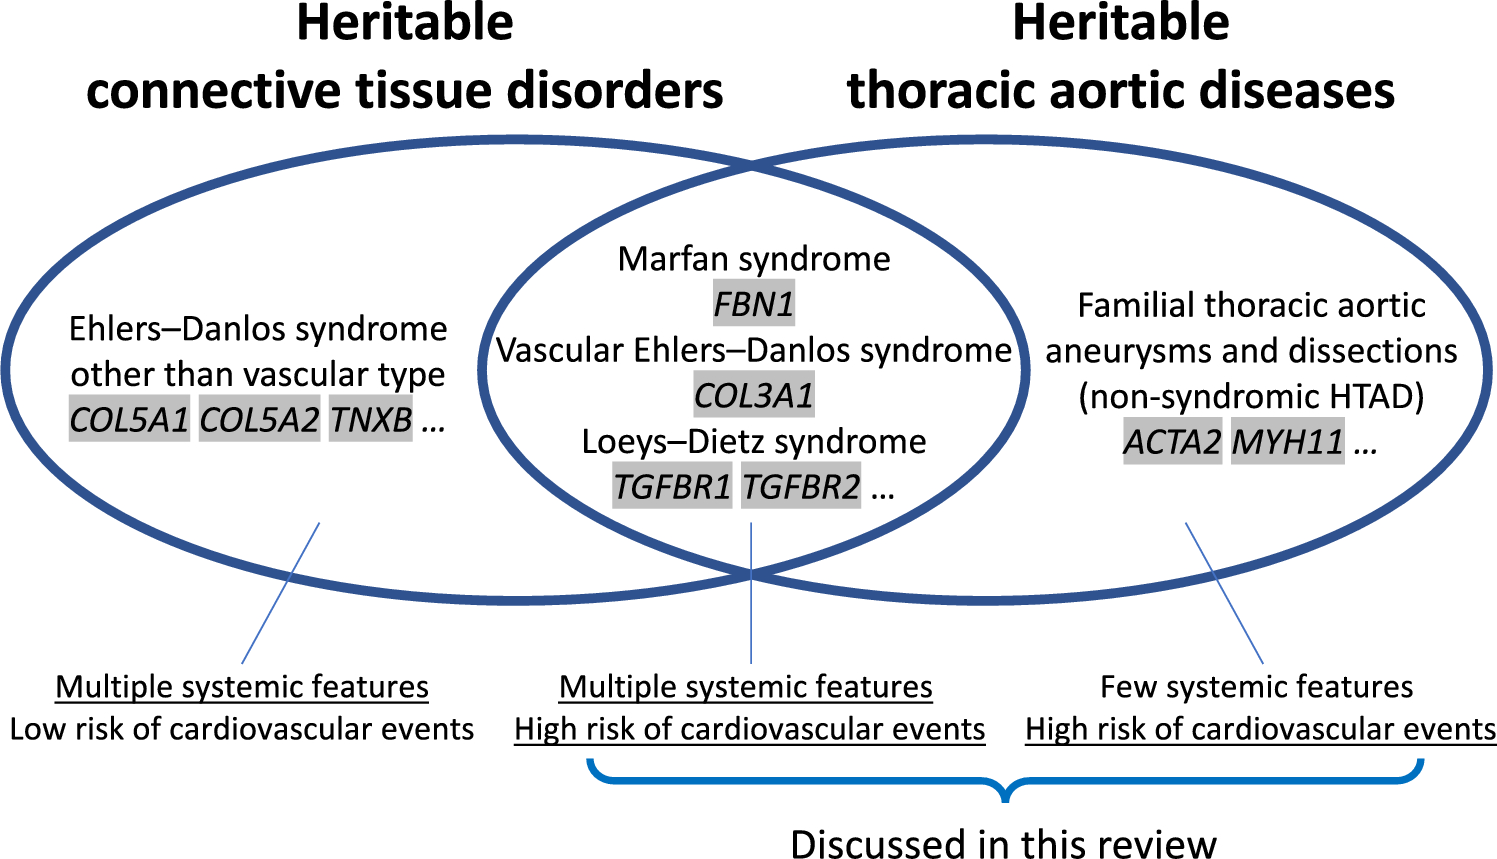 Diagnosis and treatment of cardiovascular disease in patients with heritable connective tissue disorders or heritable thoracic aortic diseases